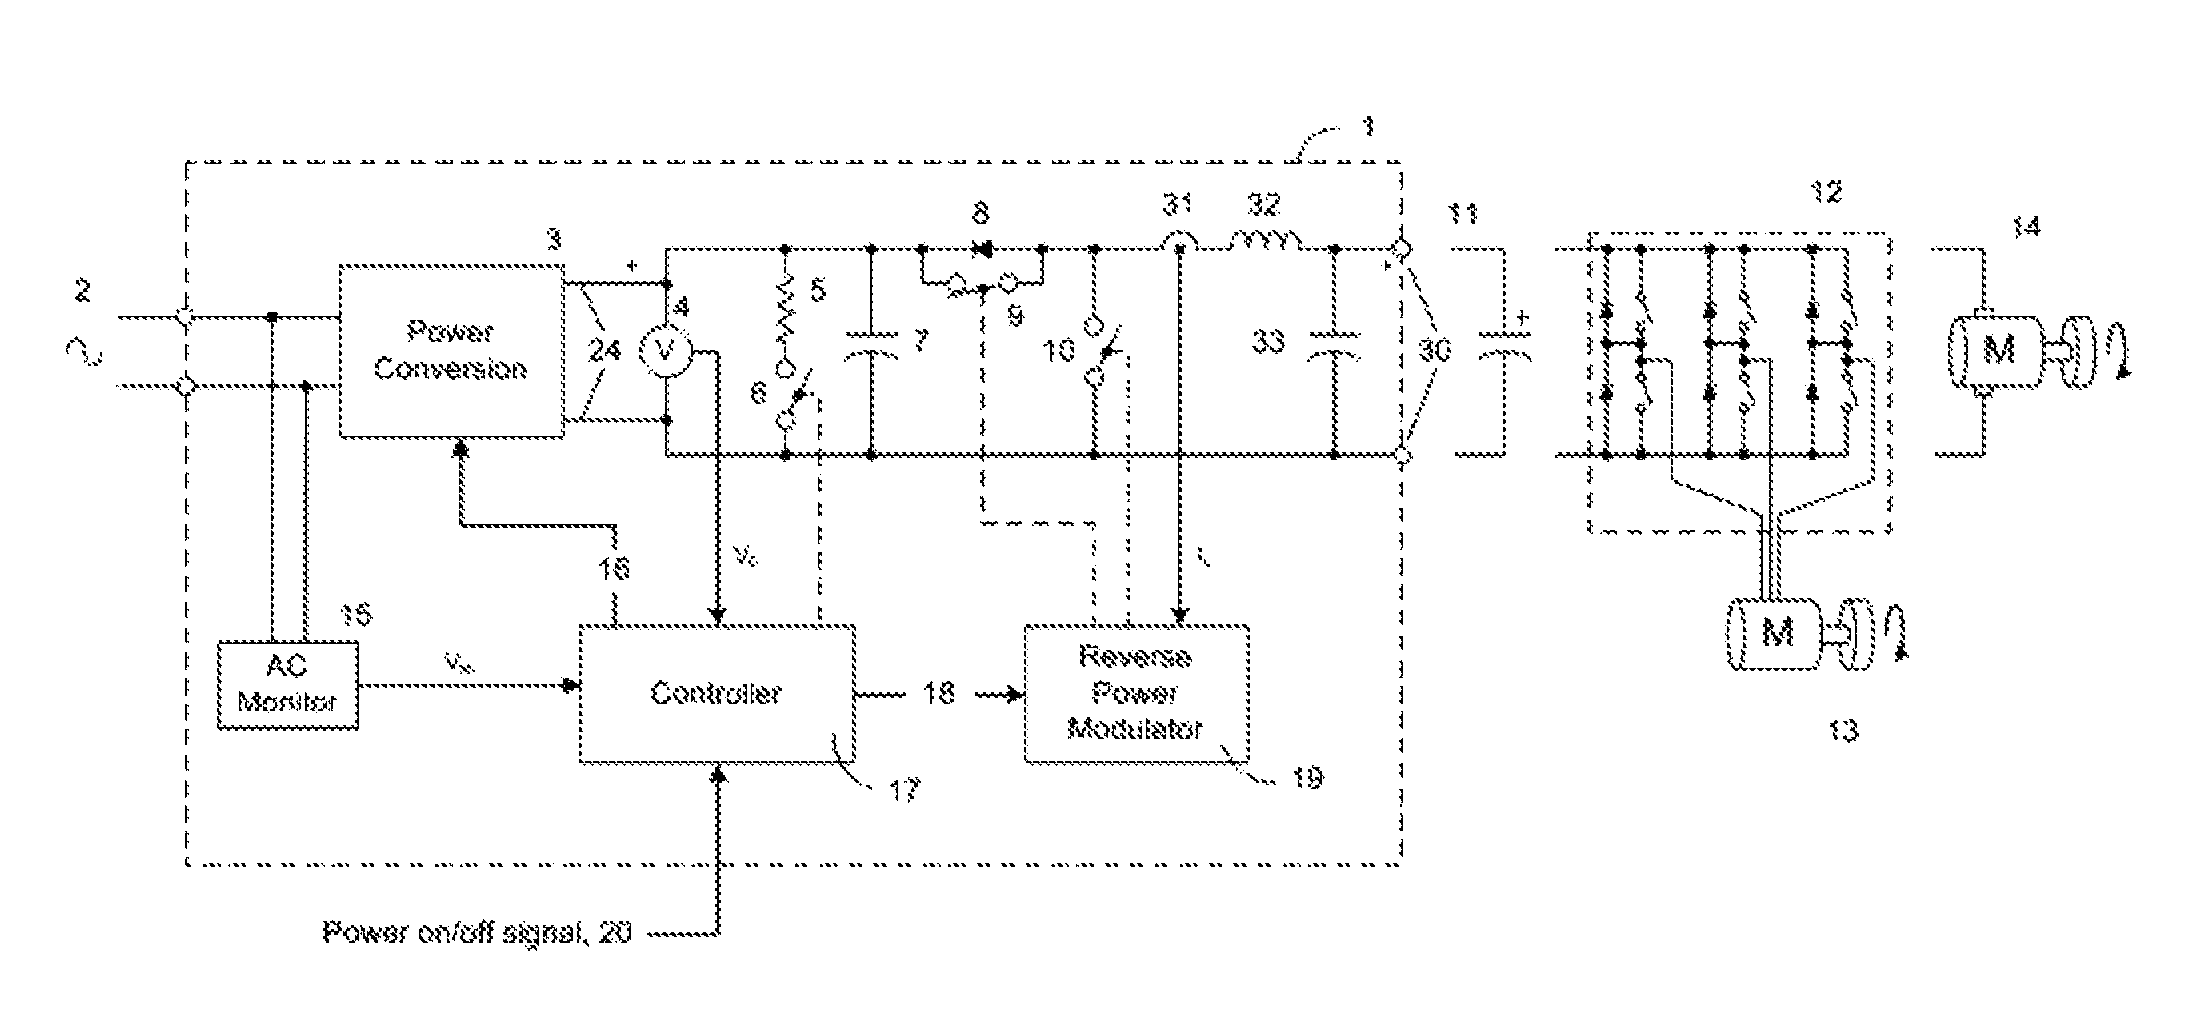 Method and apparatus to remove energy from DC loads